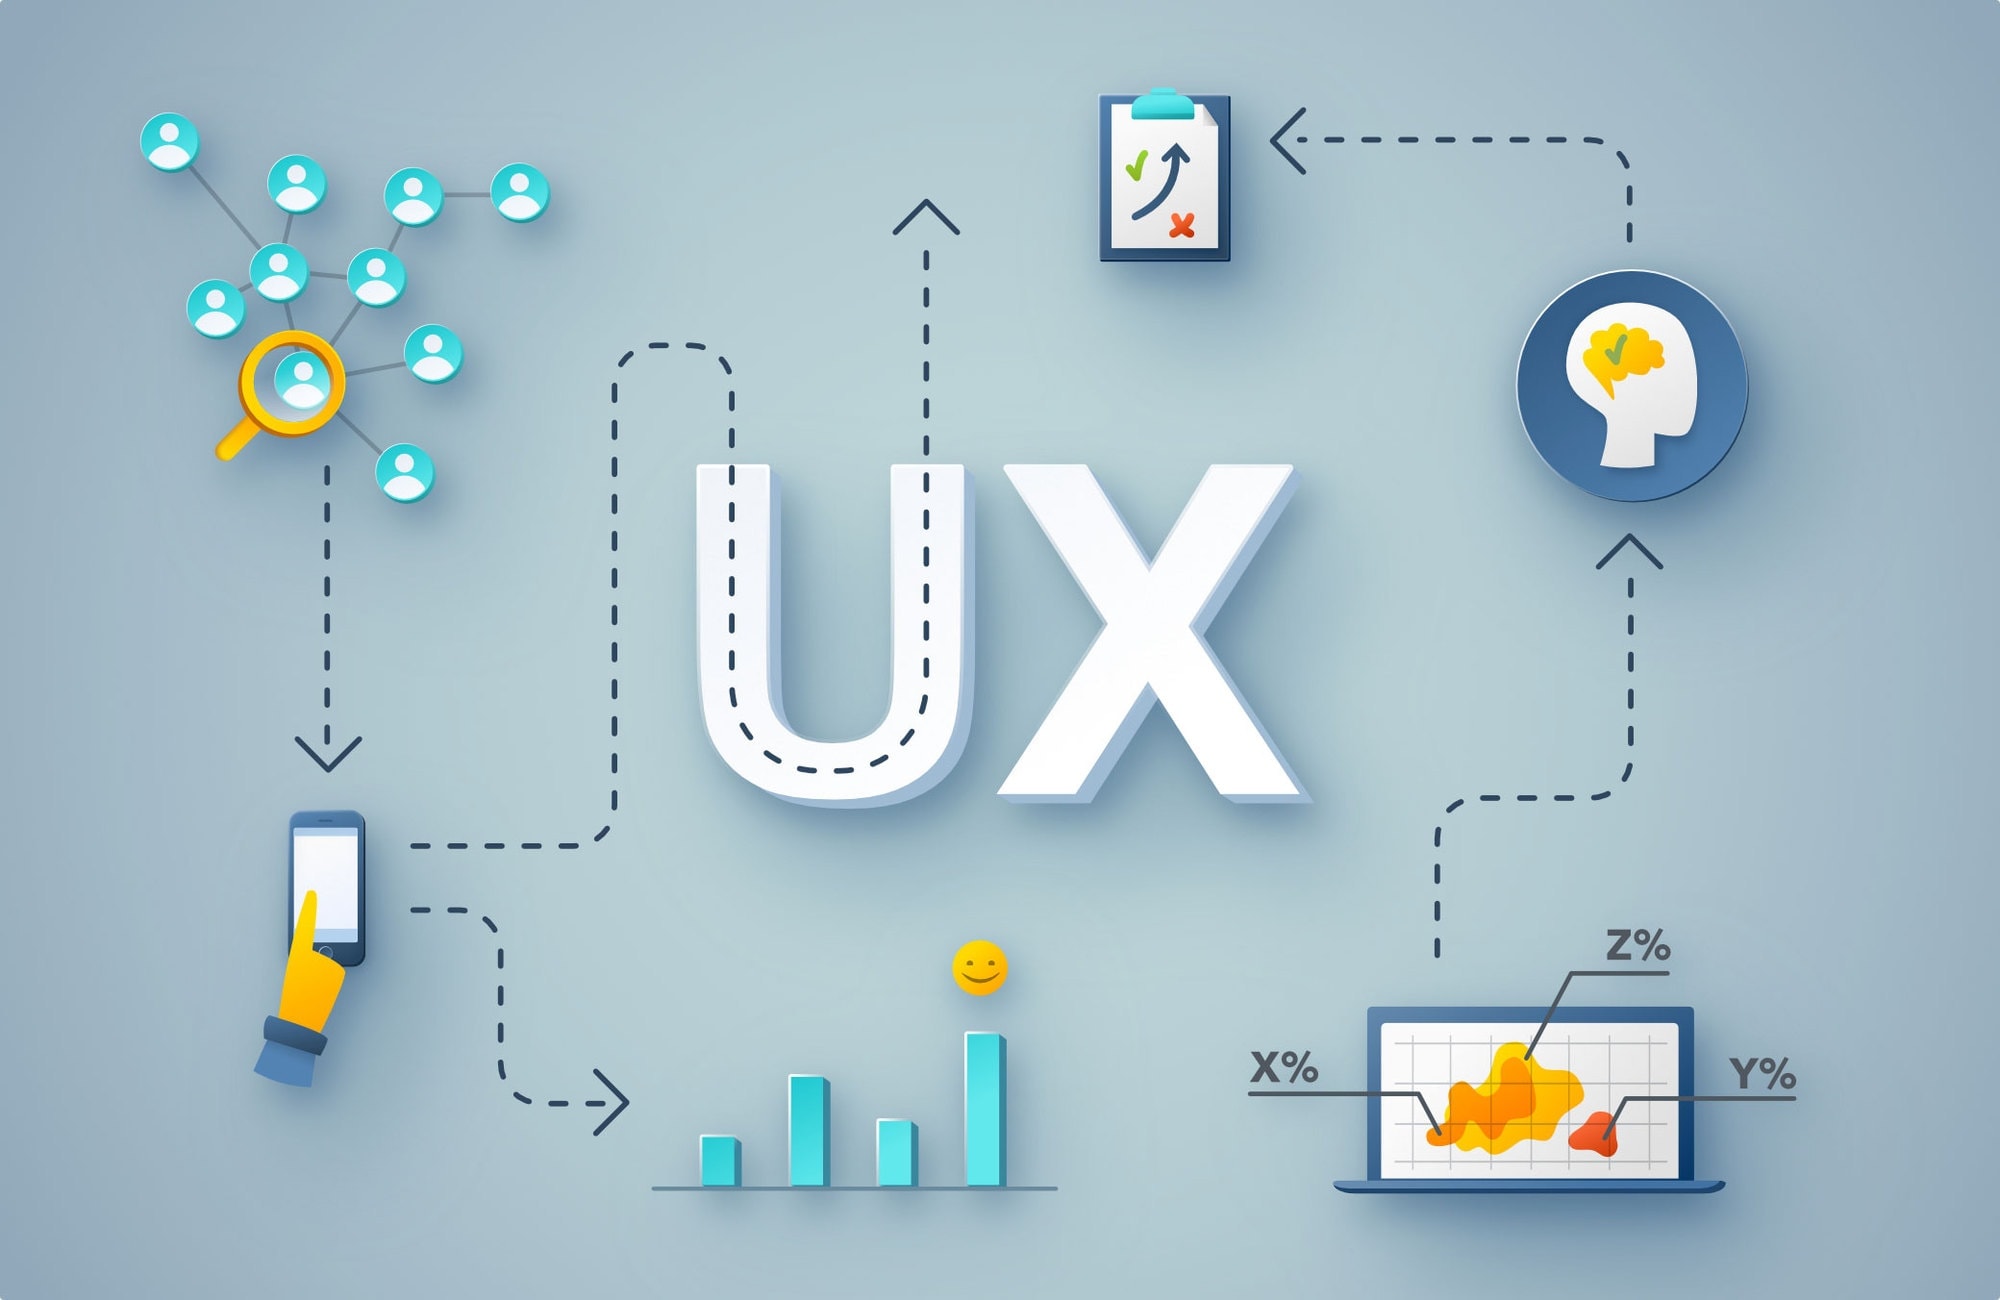 Why is user experience important in web design?